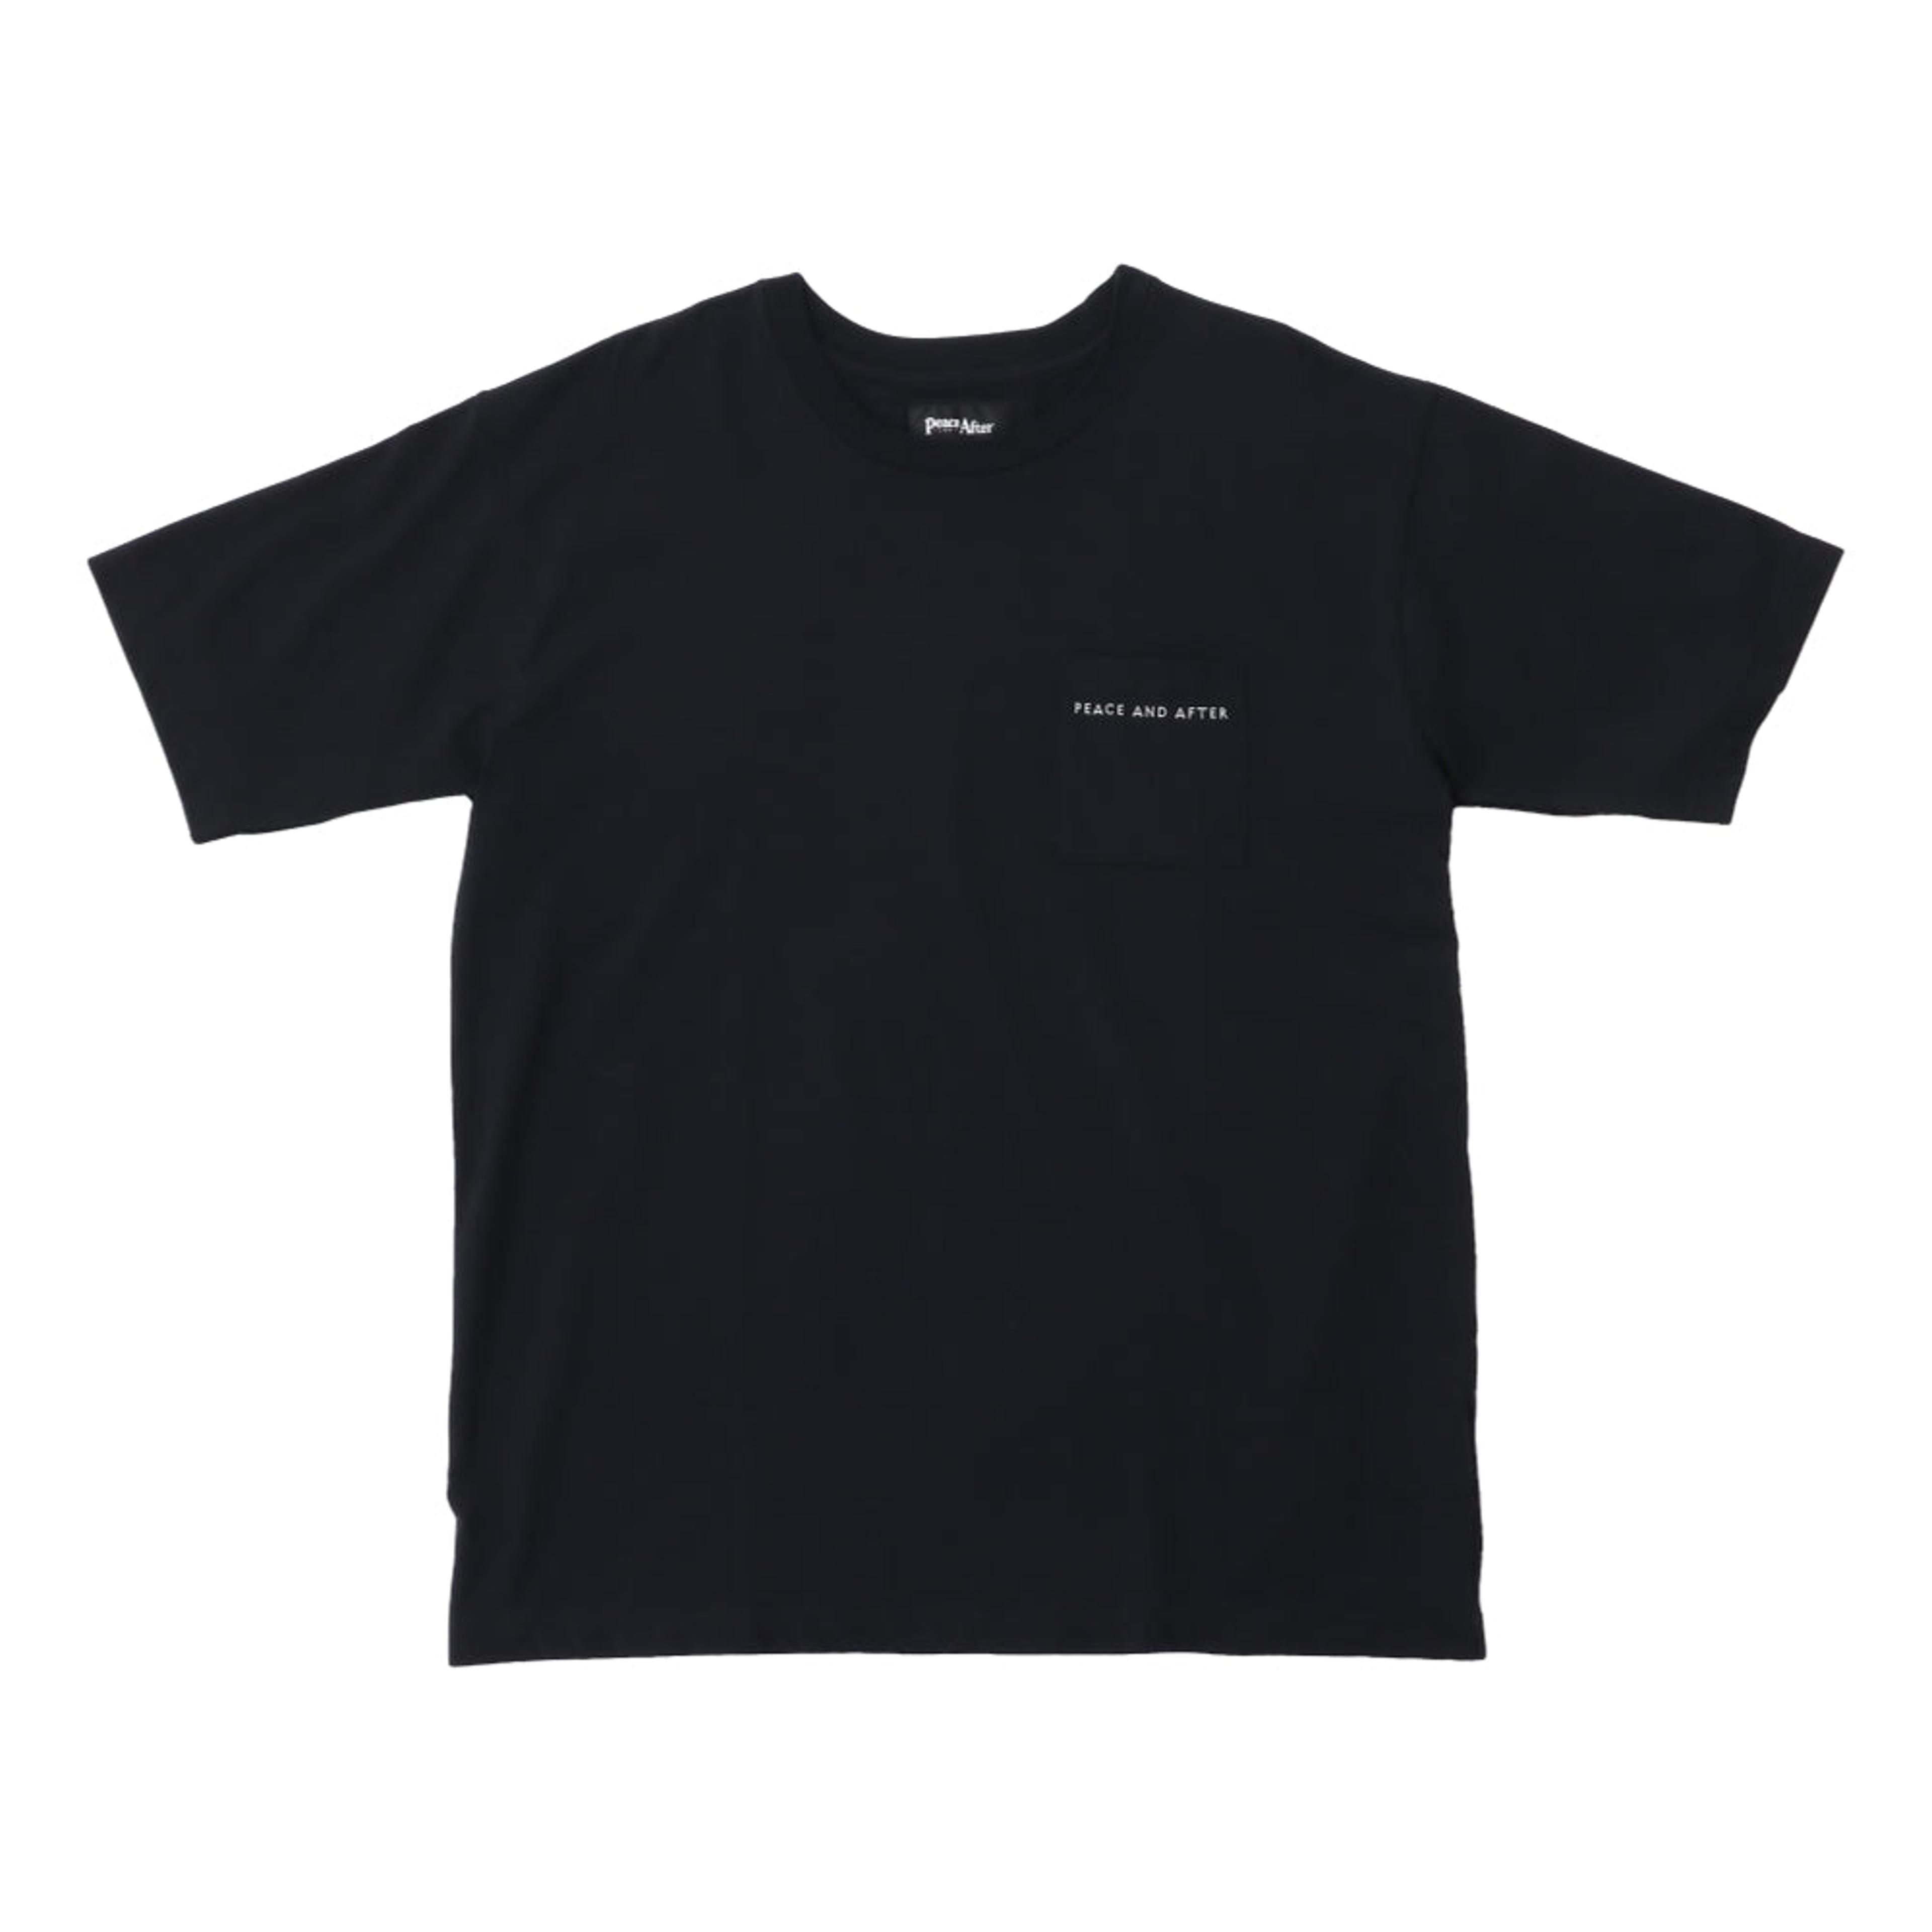 NTWRK - PEACE AND AFTER PEACE AND AFTER LOGO POCKET T-SHIRT-BLACK